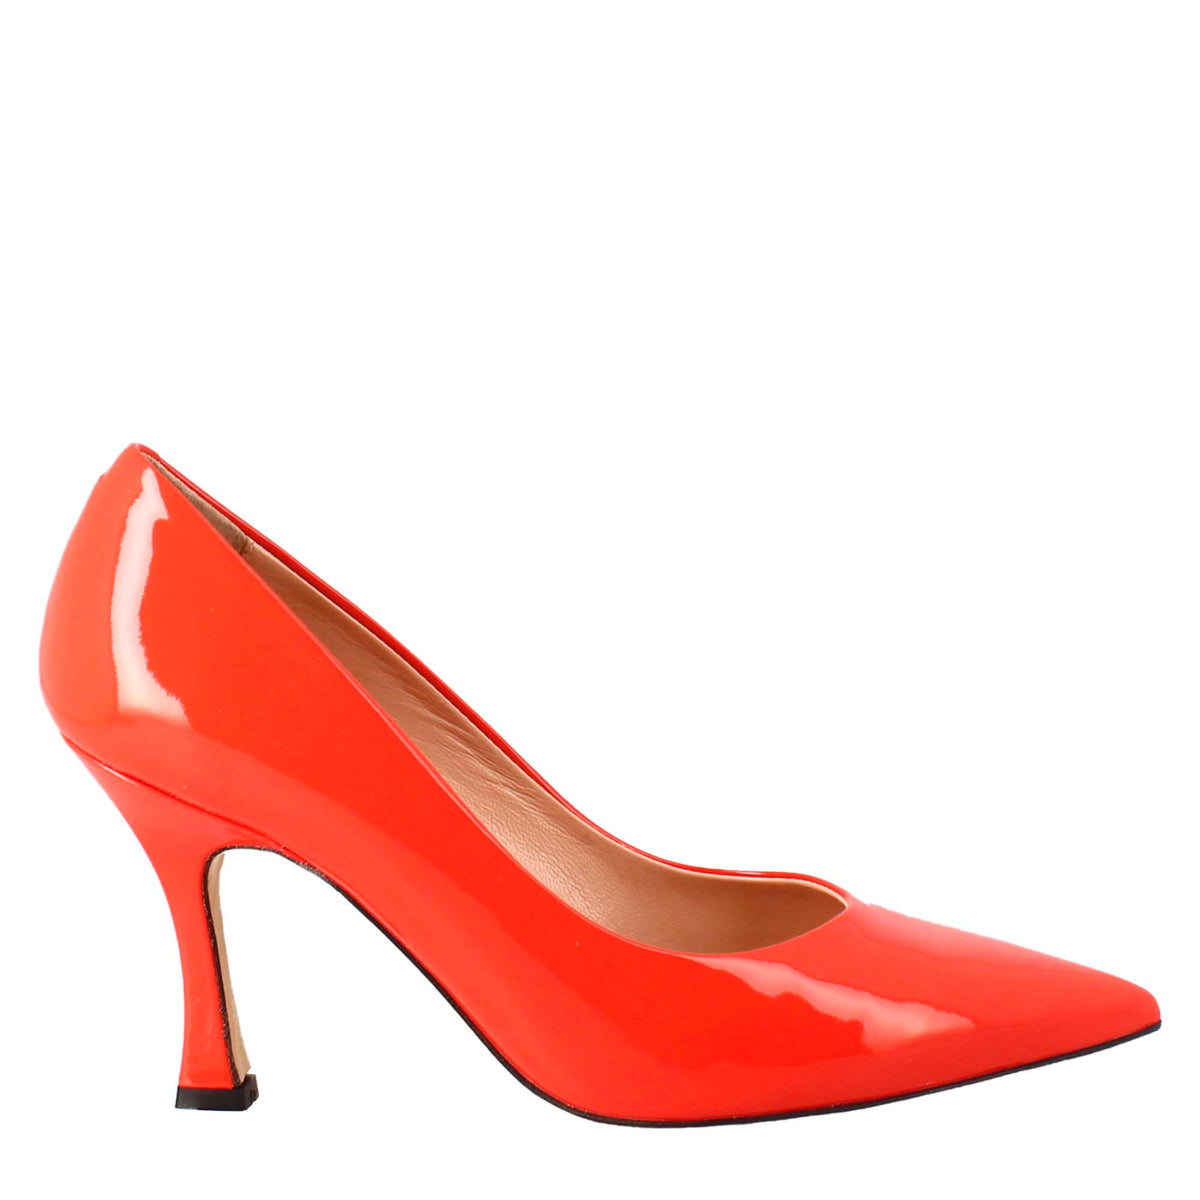 Woman's décolleté in pointed red patent leather